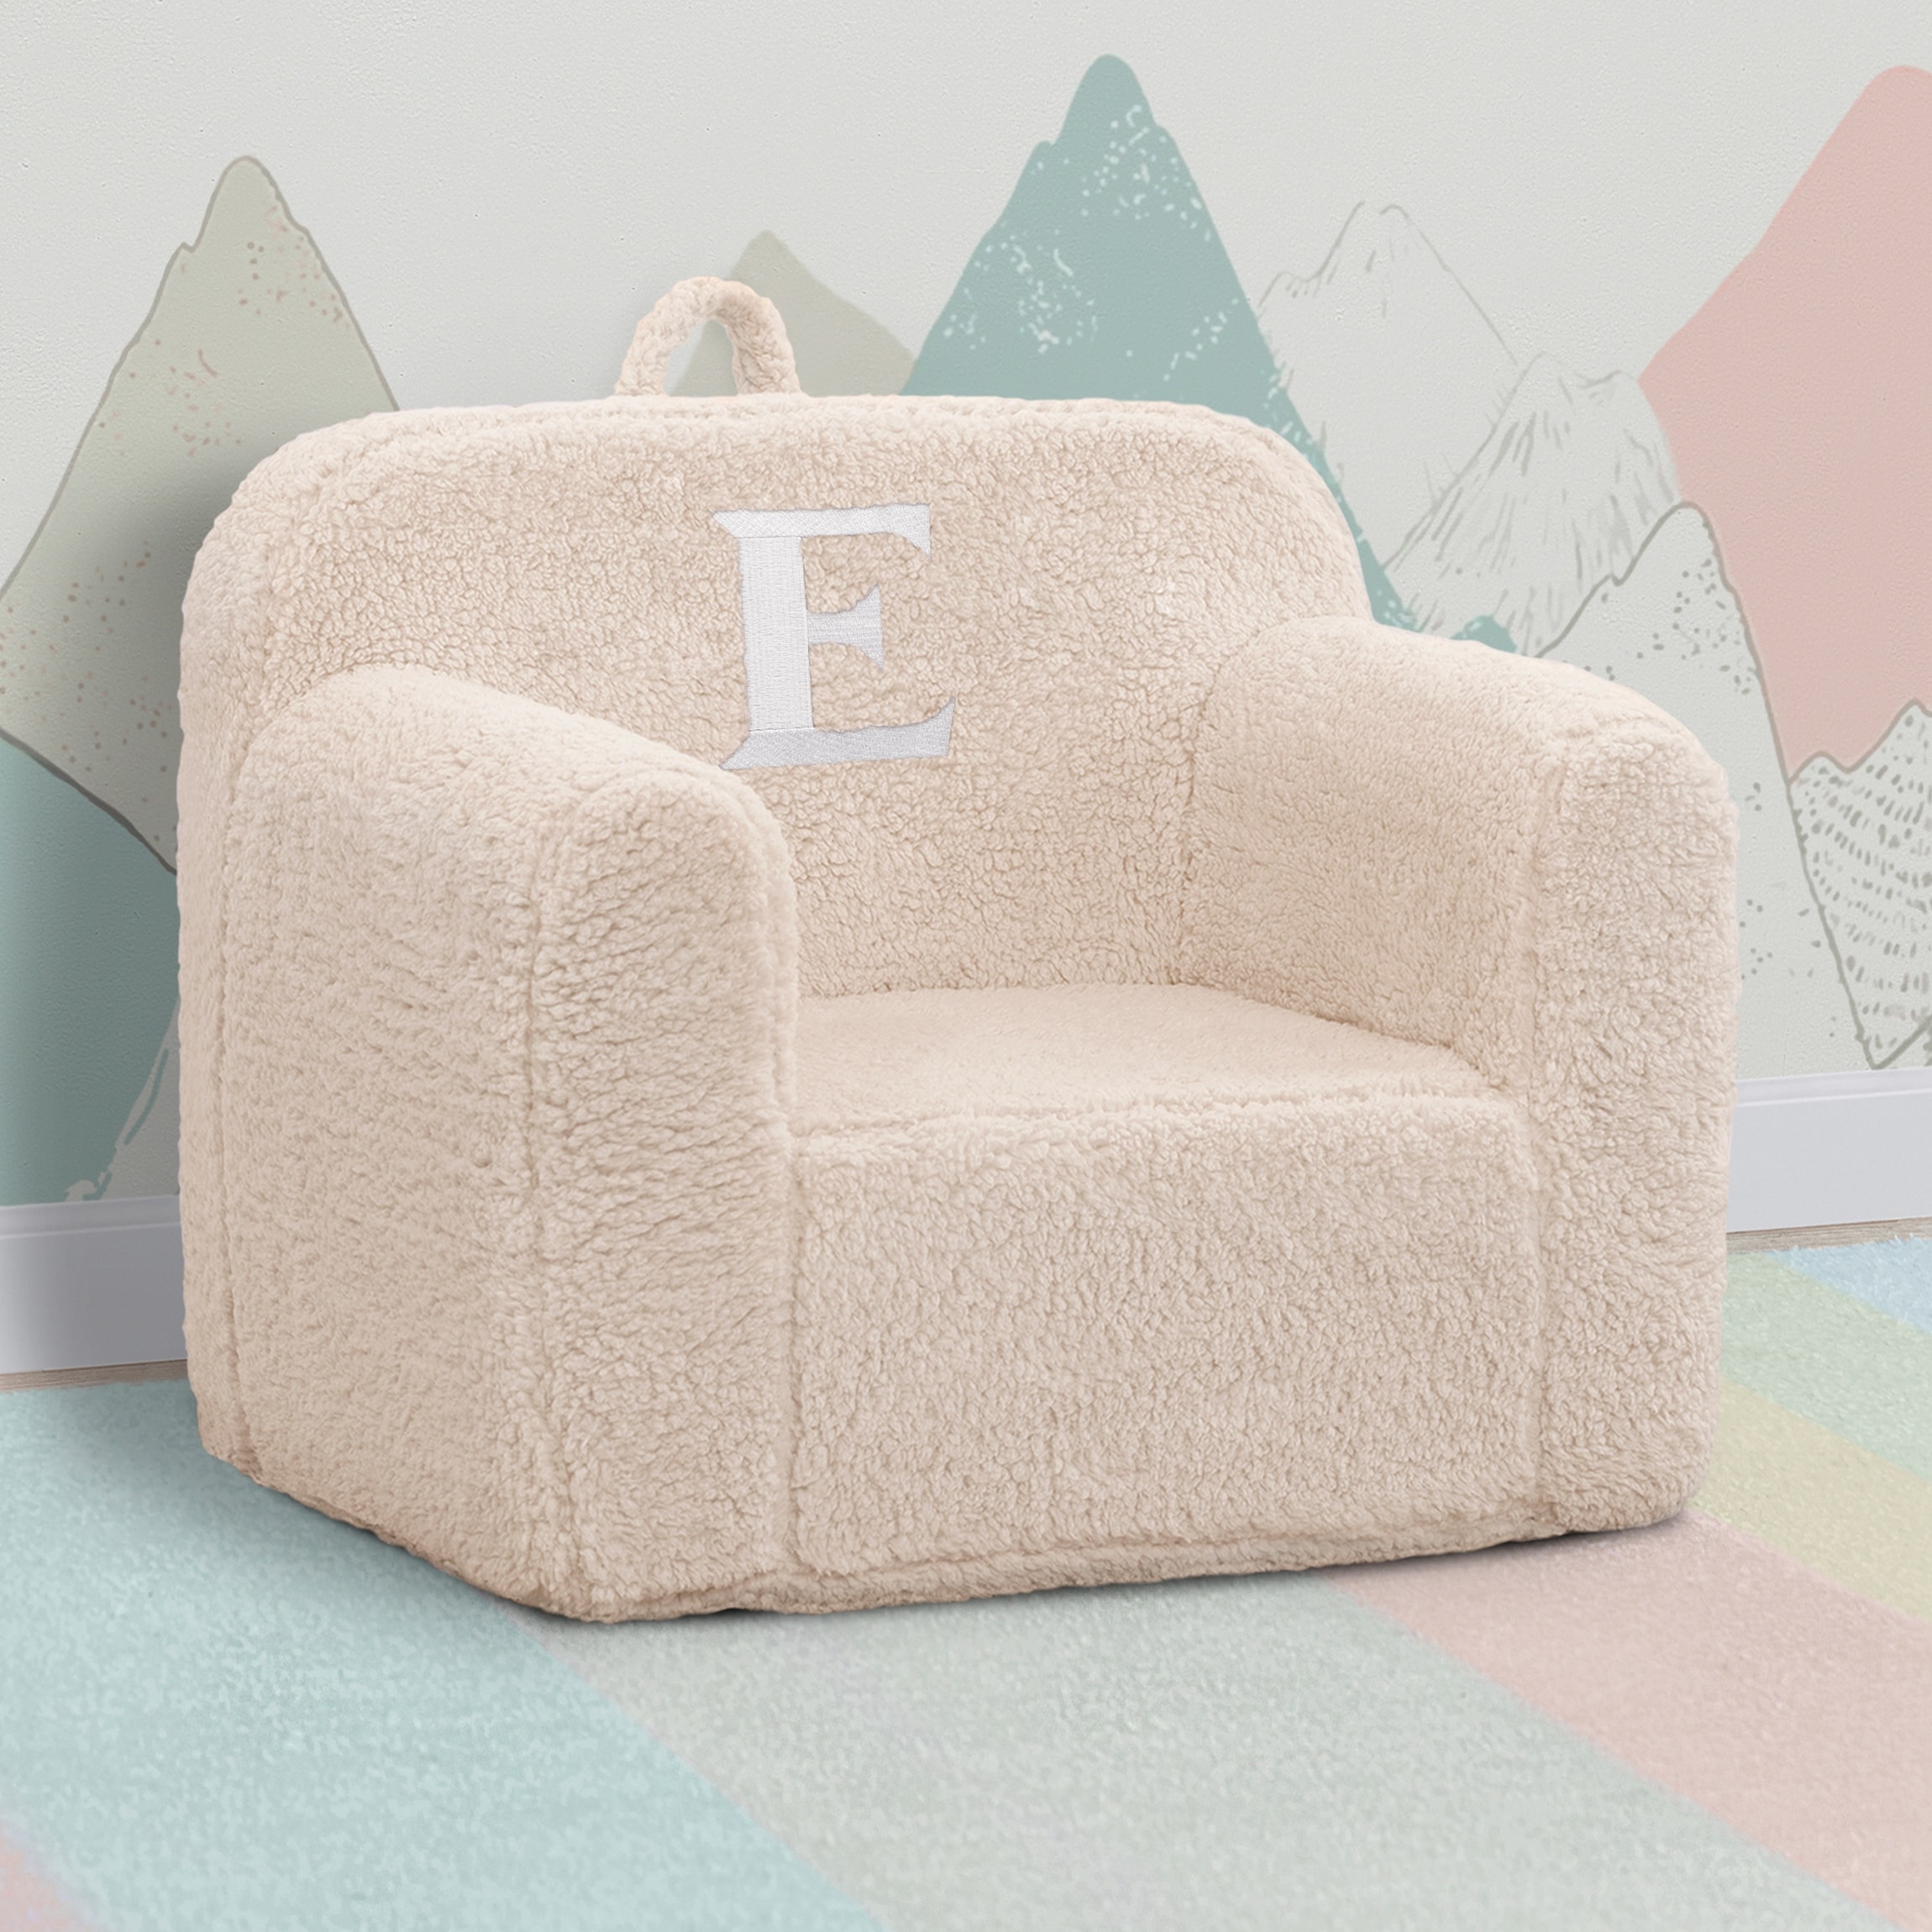 Personalized Monogram Cozee Sherpa Chair - Customize with Letter E - Foam Kids Chair for Ages 18 Months and Up